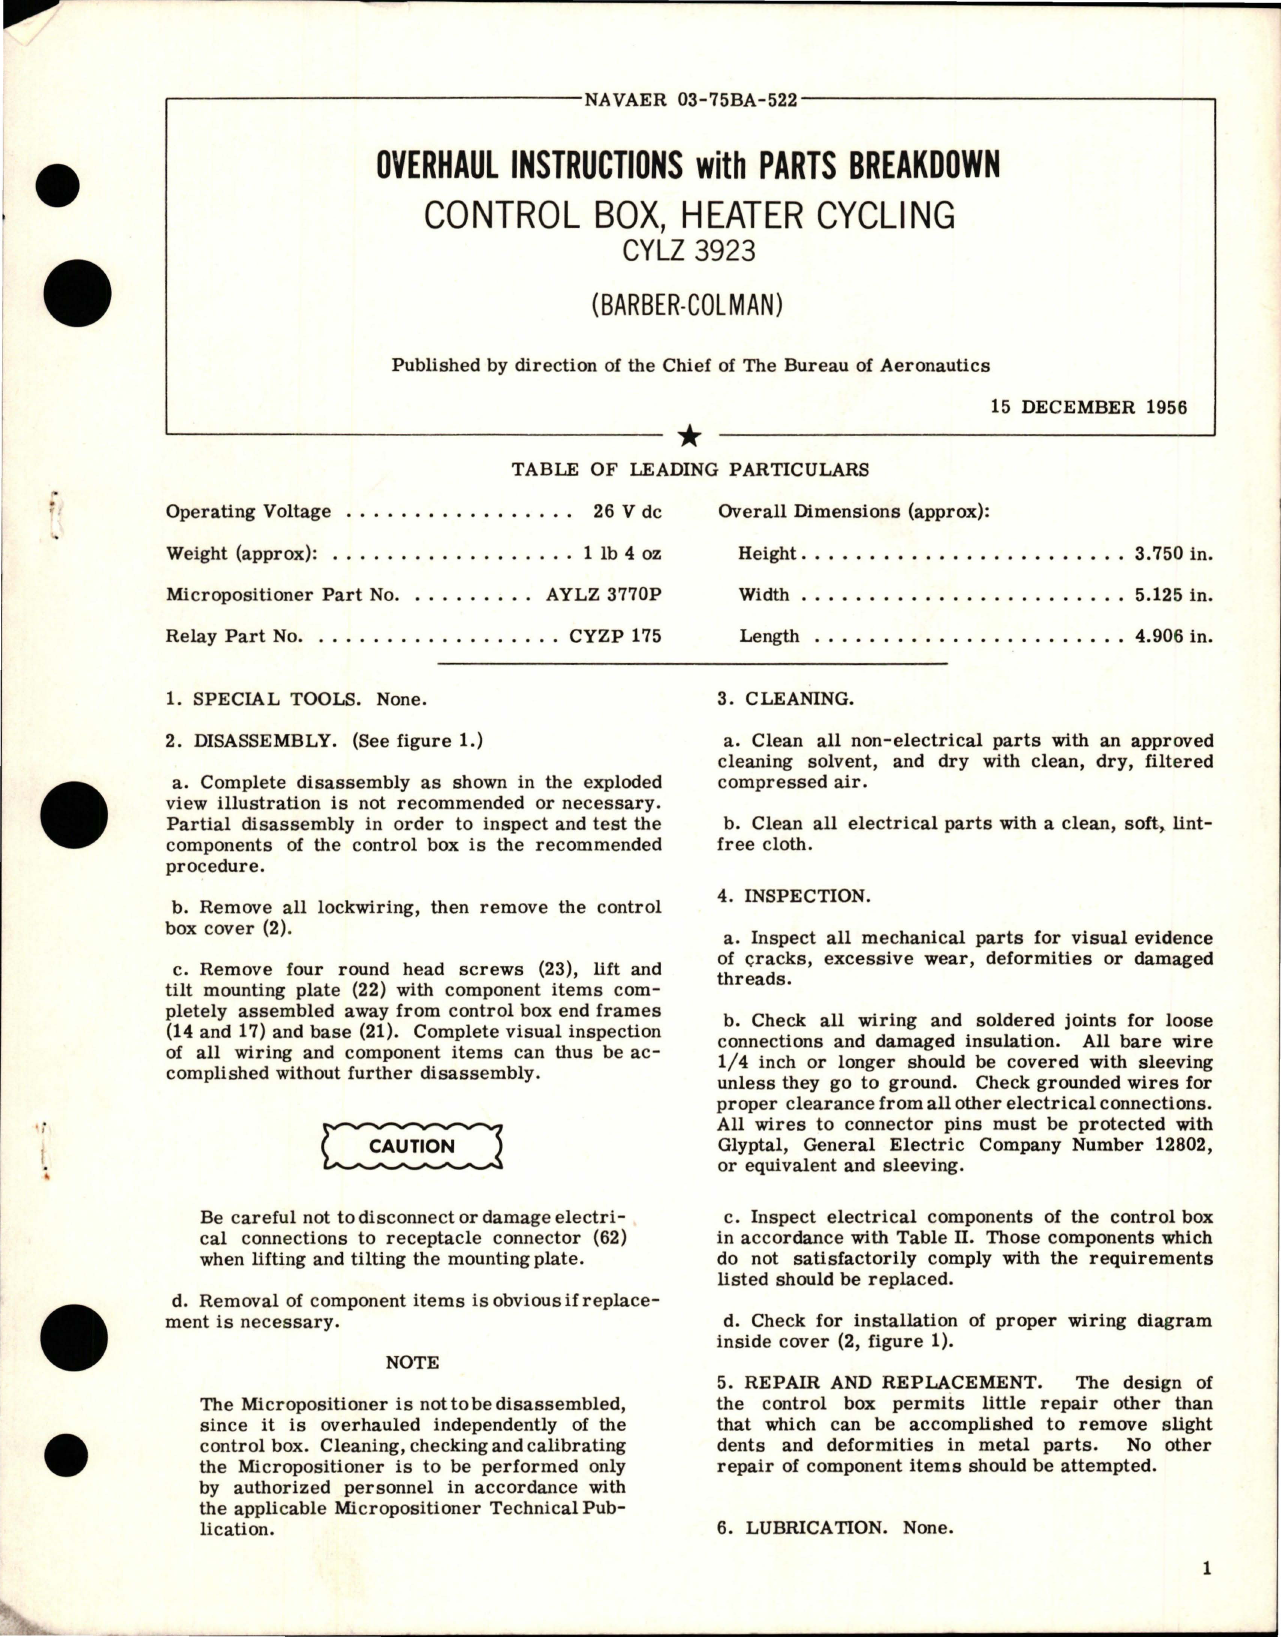 Sample page 1 from AirCorps Library document: Overhaul Instructions with Parts Breakdown for Heater Cycling Control Box - CYLZ 3923 